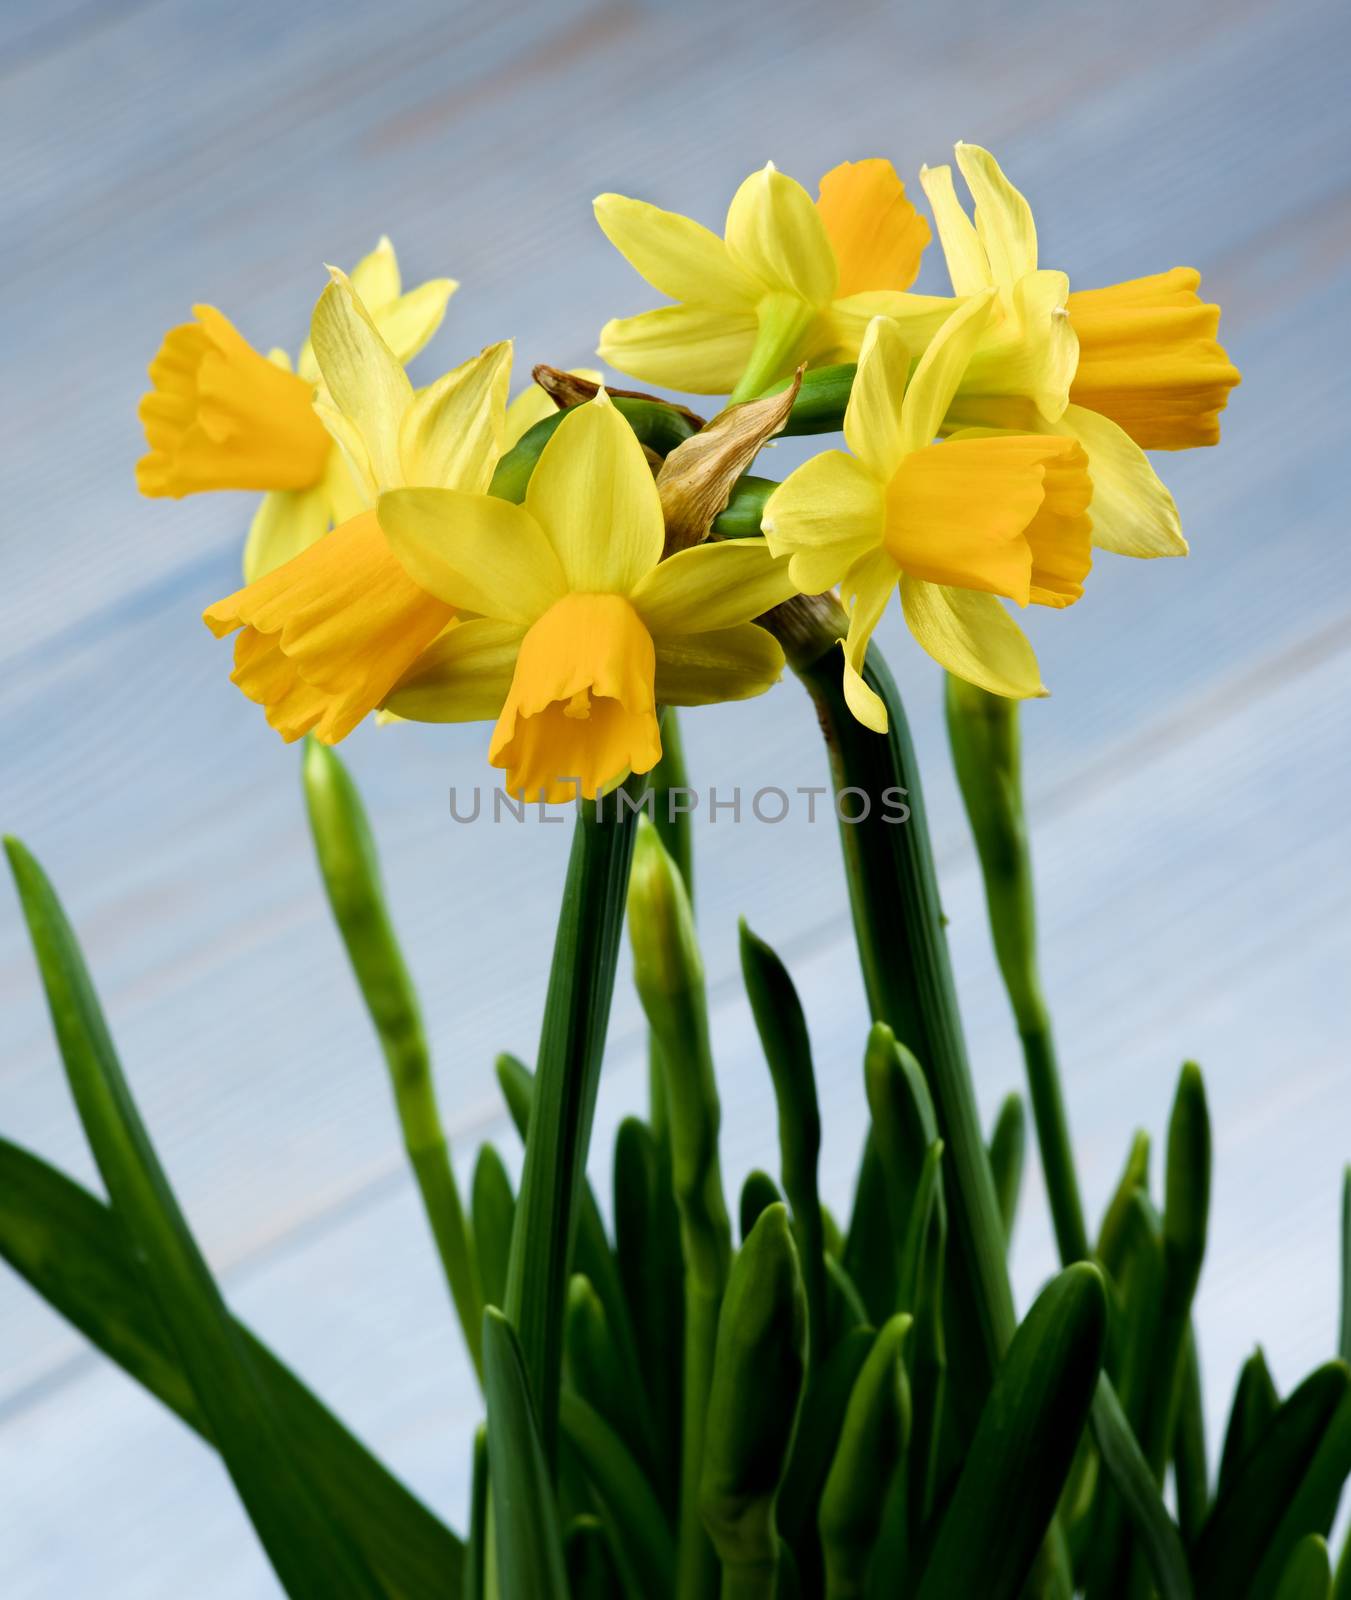 Bunch of Wild Yellow Daffodils with Green Leafs closeup on Blurred Blue background. Focus on Daffodils